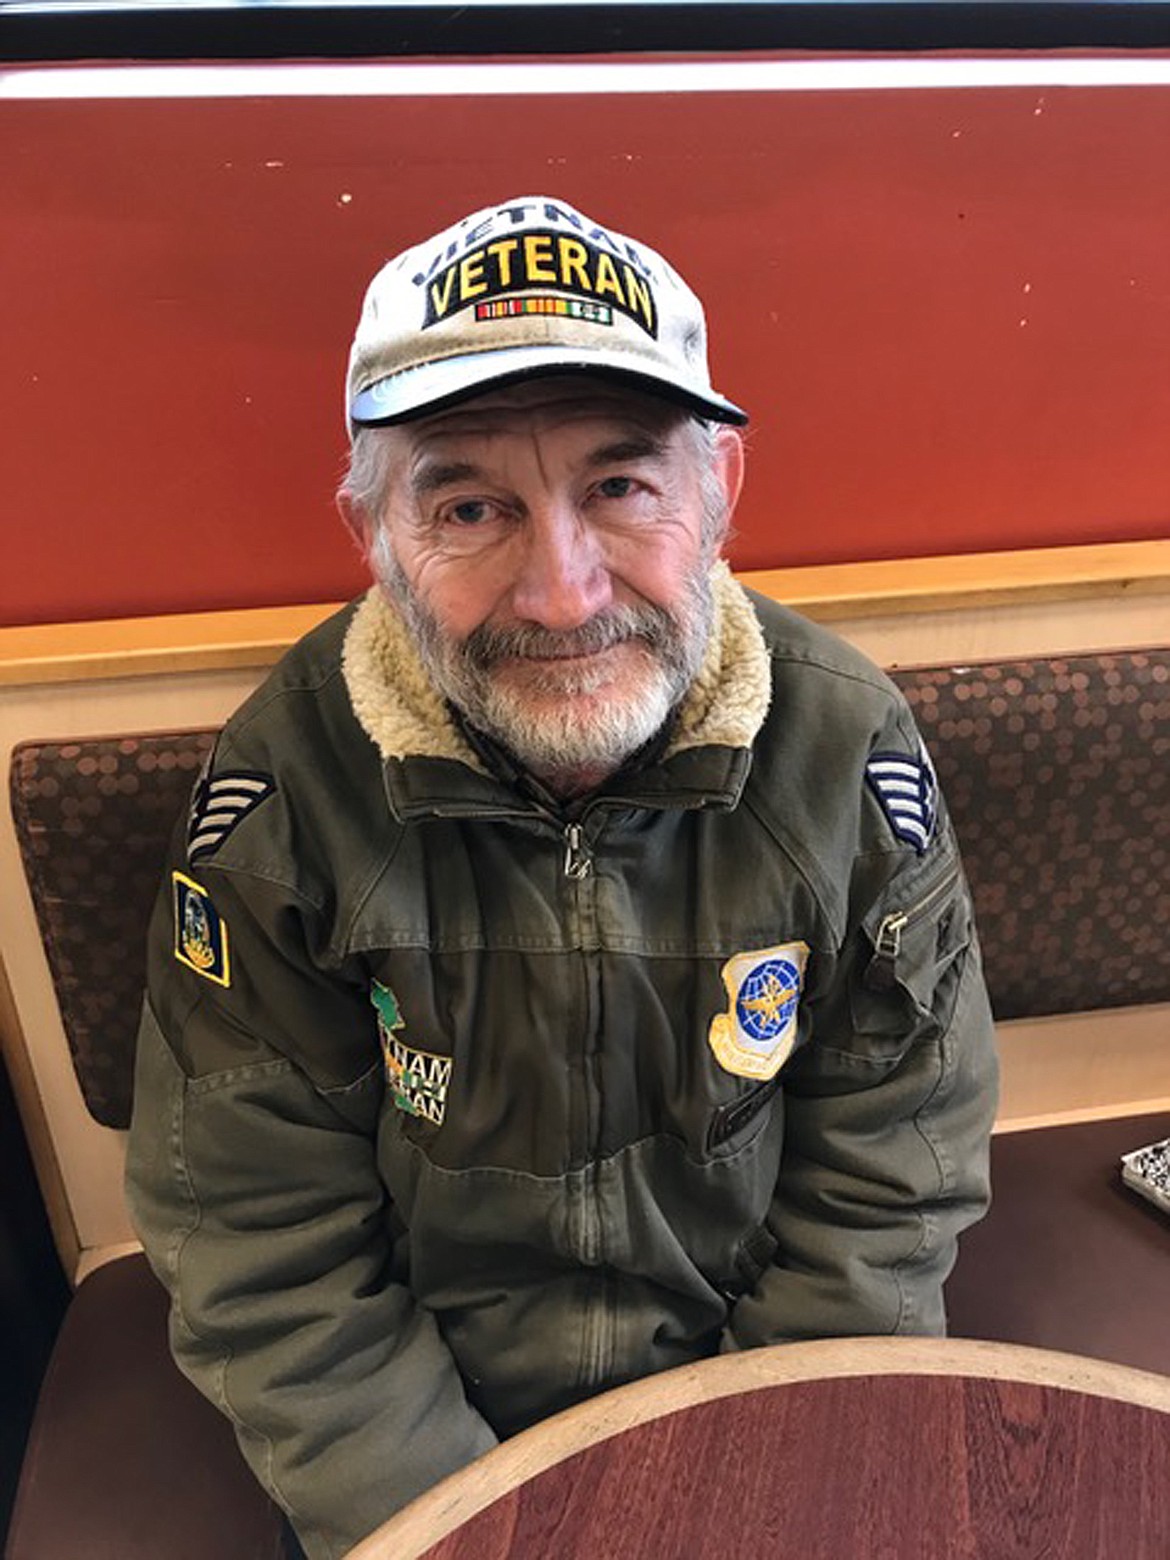 (Photo by SUSAN DRINKARD)
Delmar Wood of Sandpoint wears his Vietnam jacket and hat while relaying his Vietnam experience in the 35th Combat Support Group on the Security Police Squadron in Phan Rang, Vietnam.